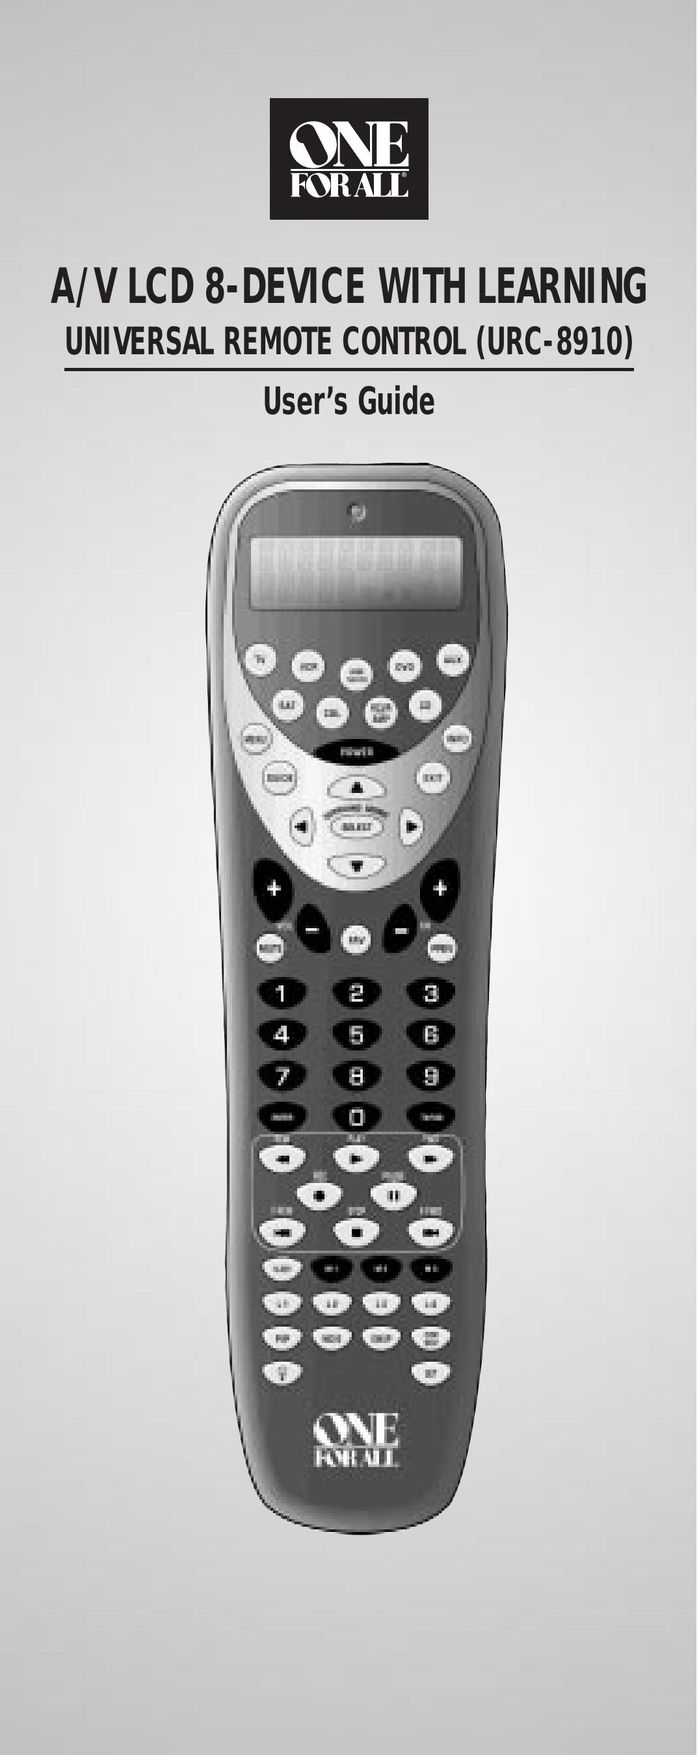 One for All (URC-8910) Universal Remote User Manual